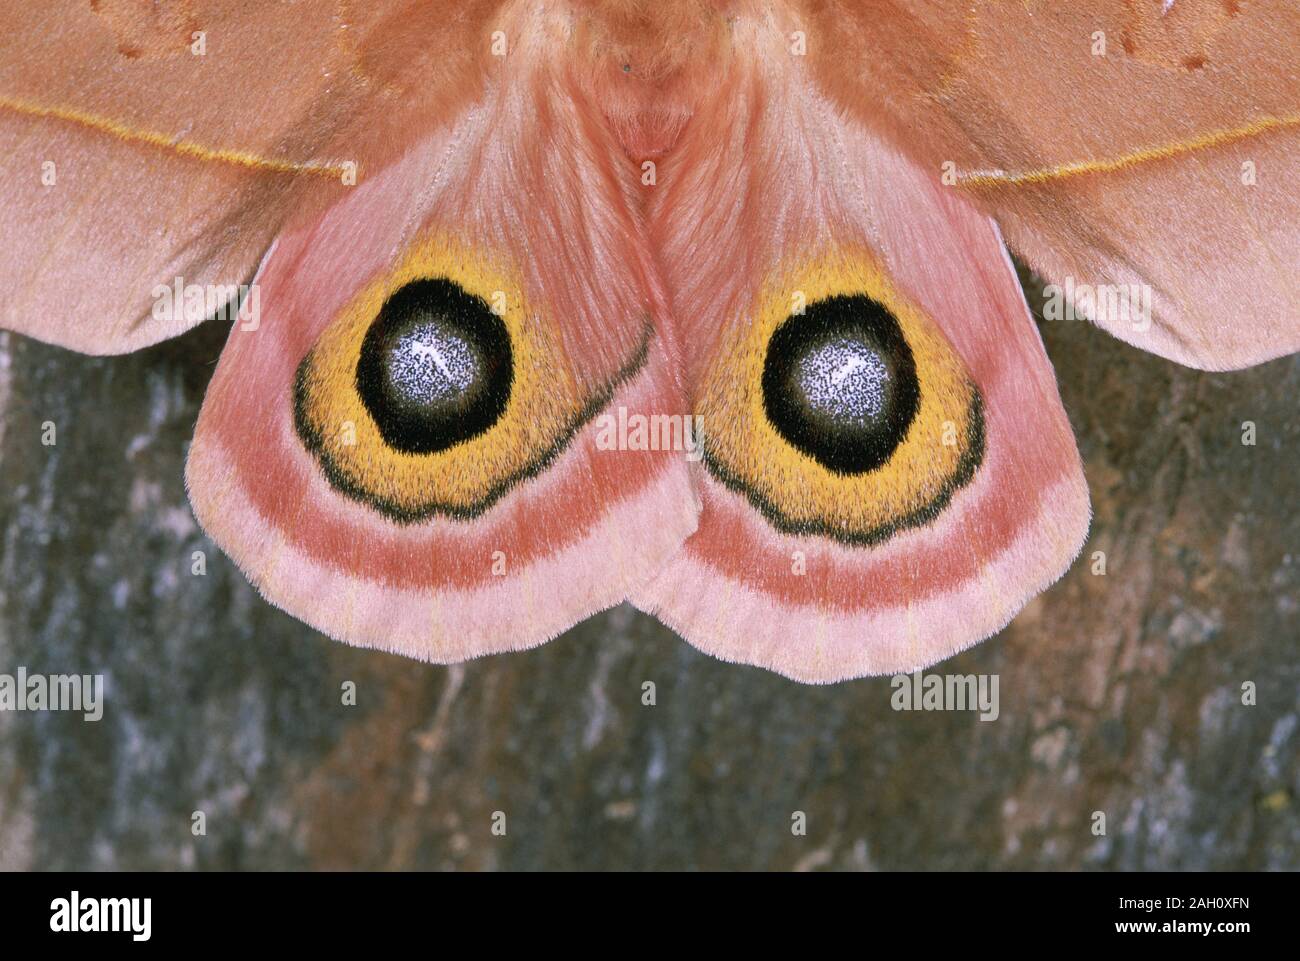 Cecrops Eyed Silkmoth (Automeris cecrops pamina) Wings spread showing false eyes being flashed in startle display. Arizona, summer. Stock Photo